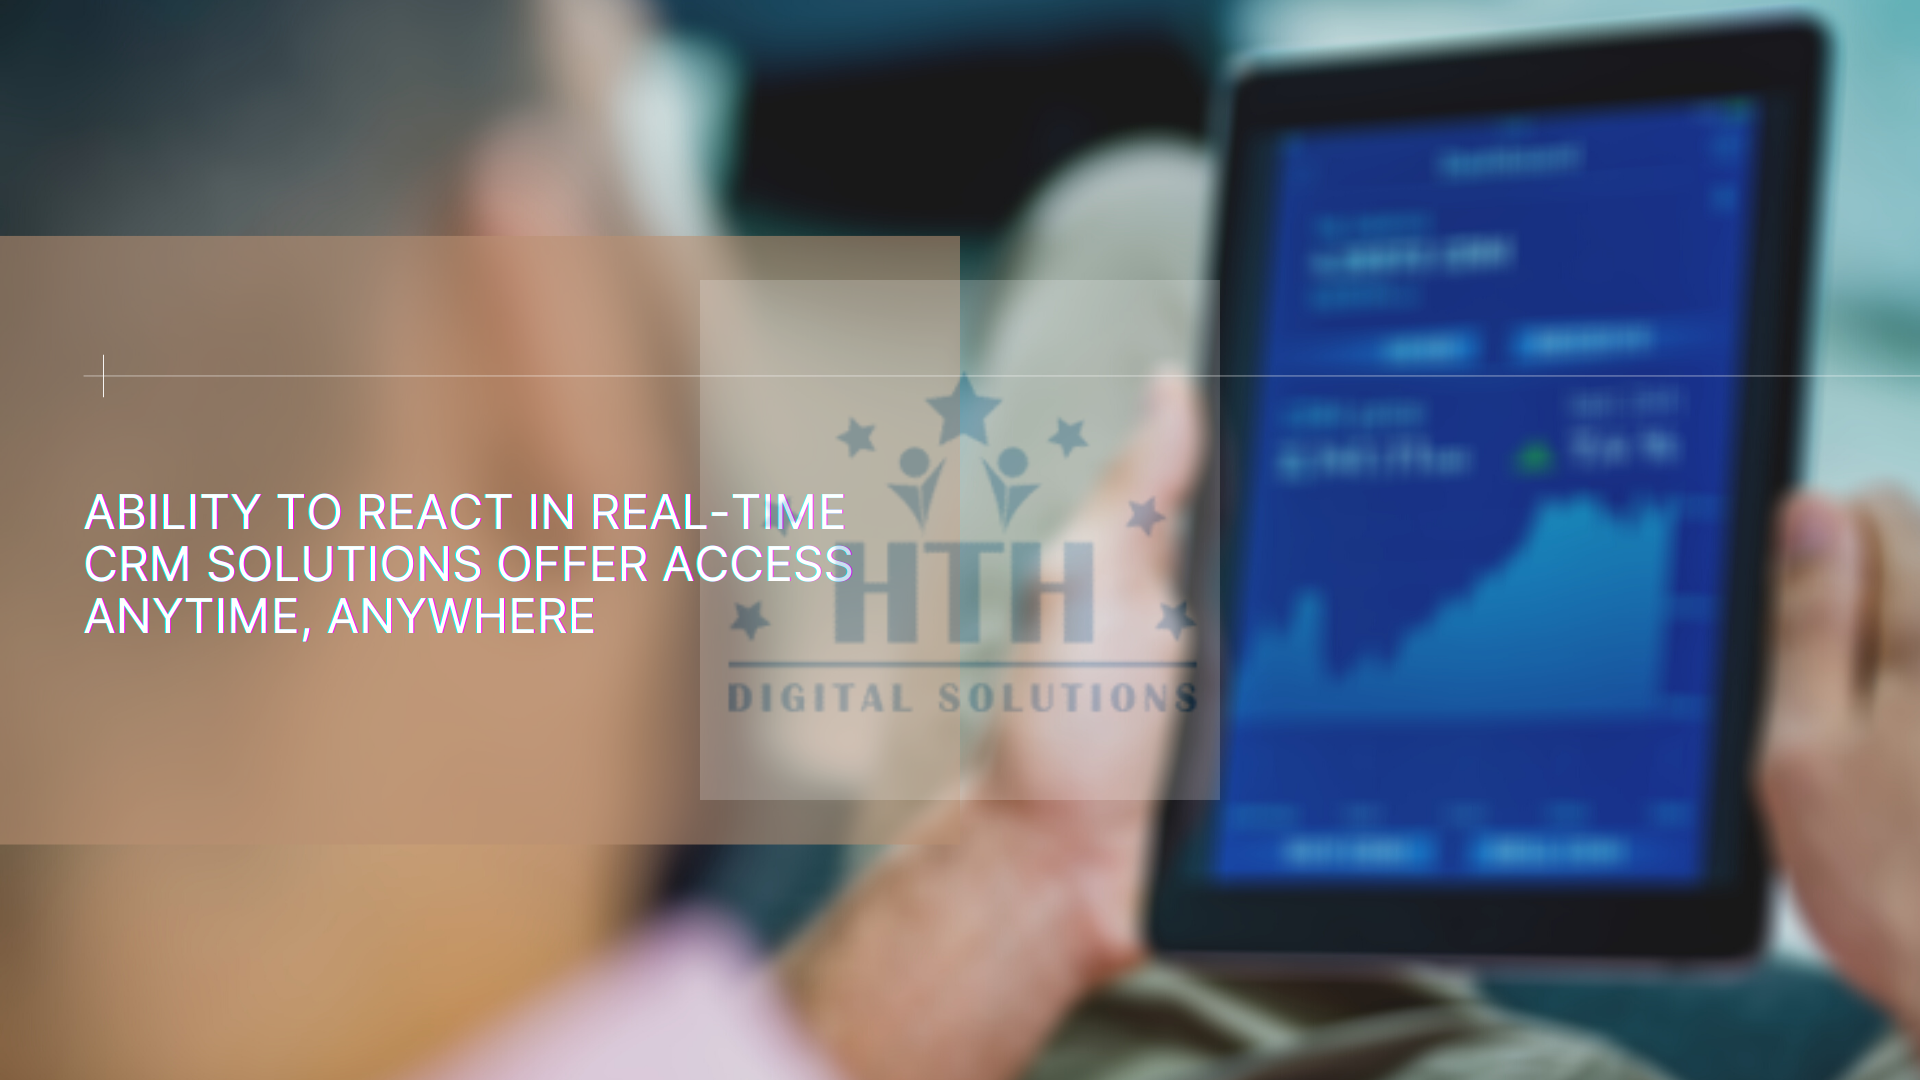 HTH-DIGITAL-SOLUTIONS-CRM-BENEFIT-WITH-SME